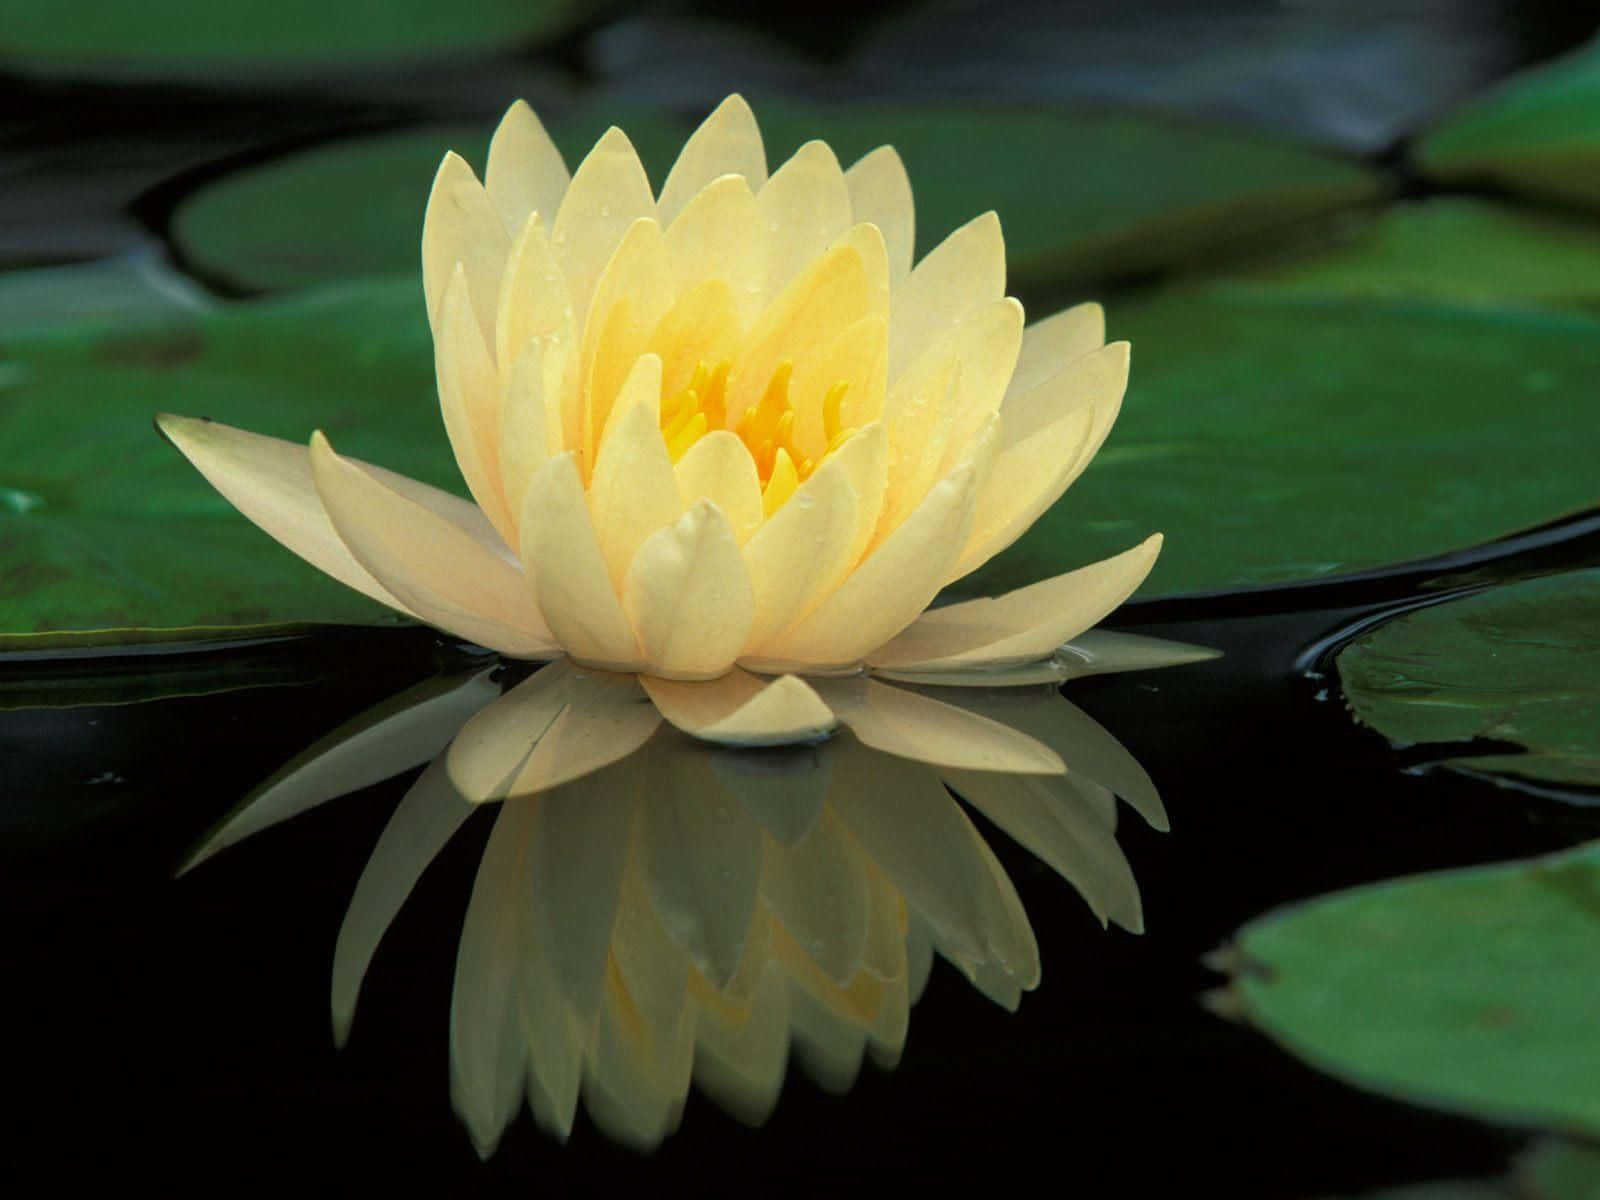 Serene Lotus Flower Blooming in a Tranquil Pond